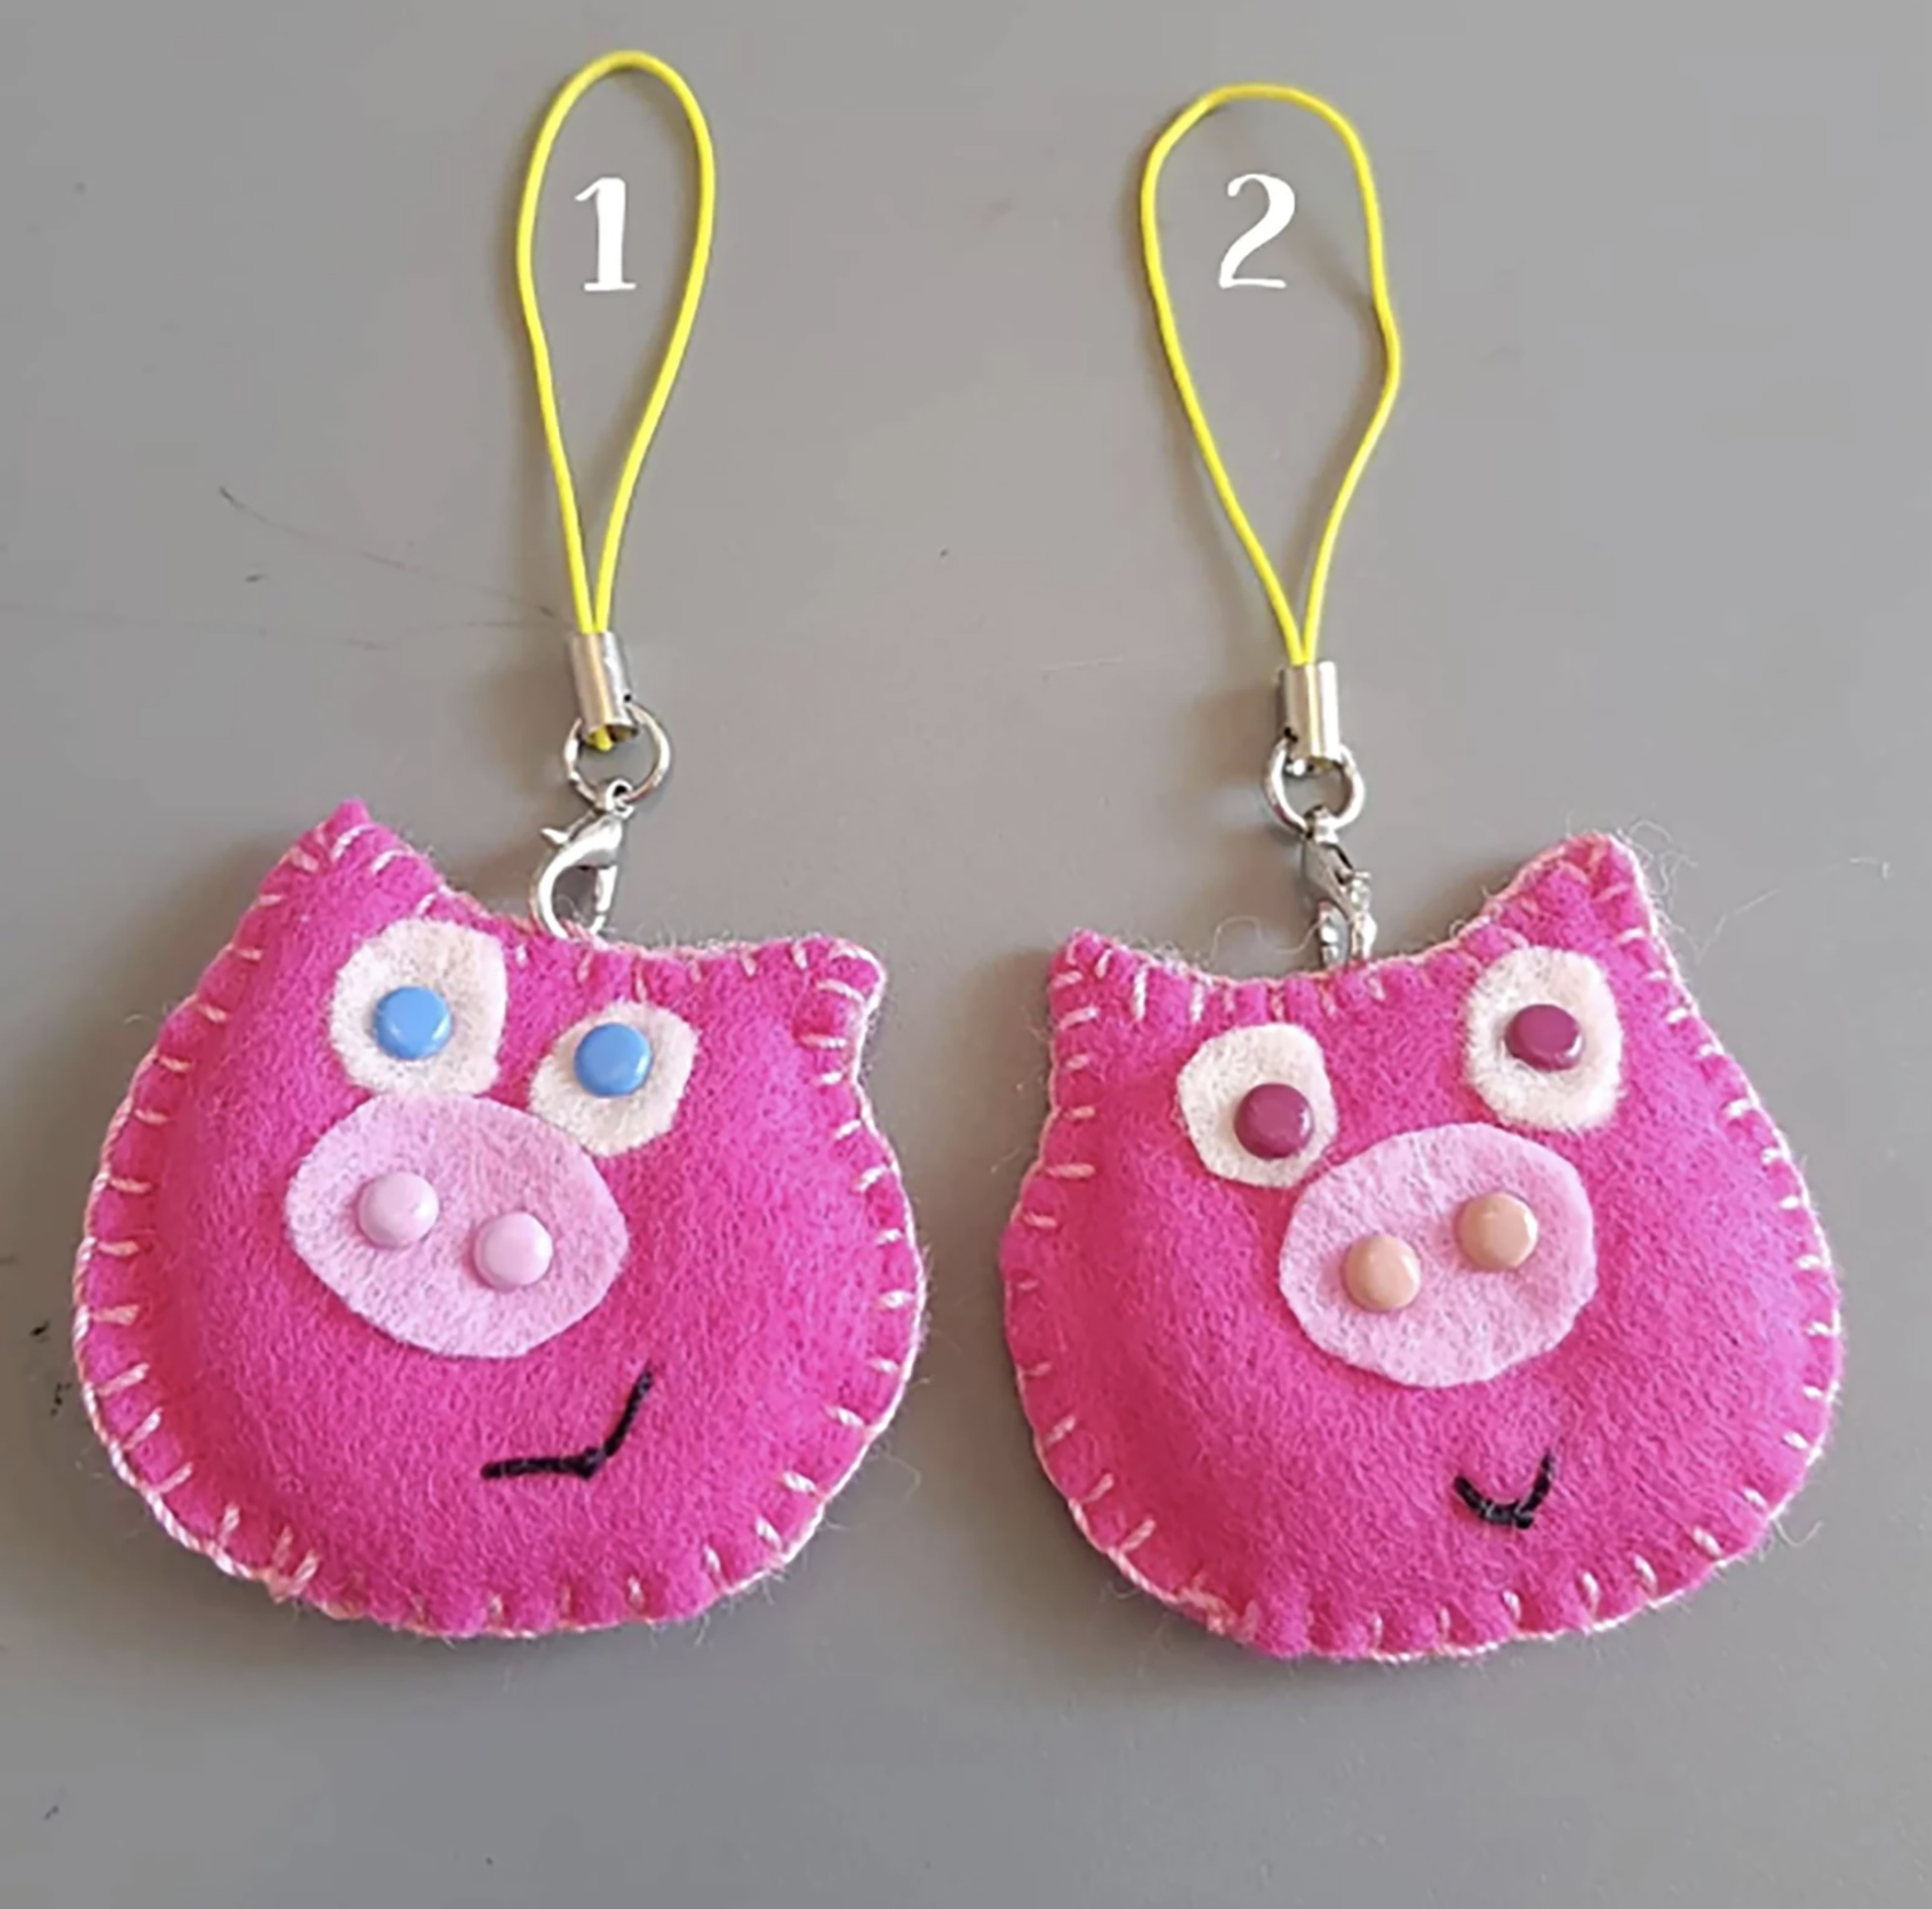 Frog keychain - Pig to Hang - Embroidery Cute Felt Animal head with strap for backpack or key - C o c o F l o w e r